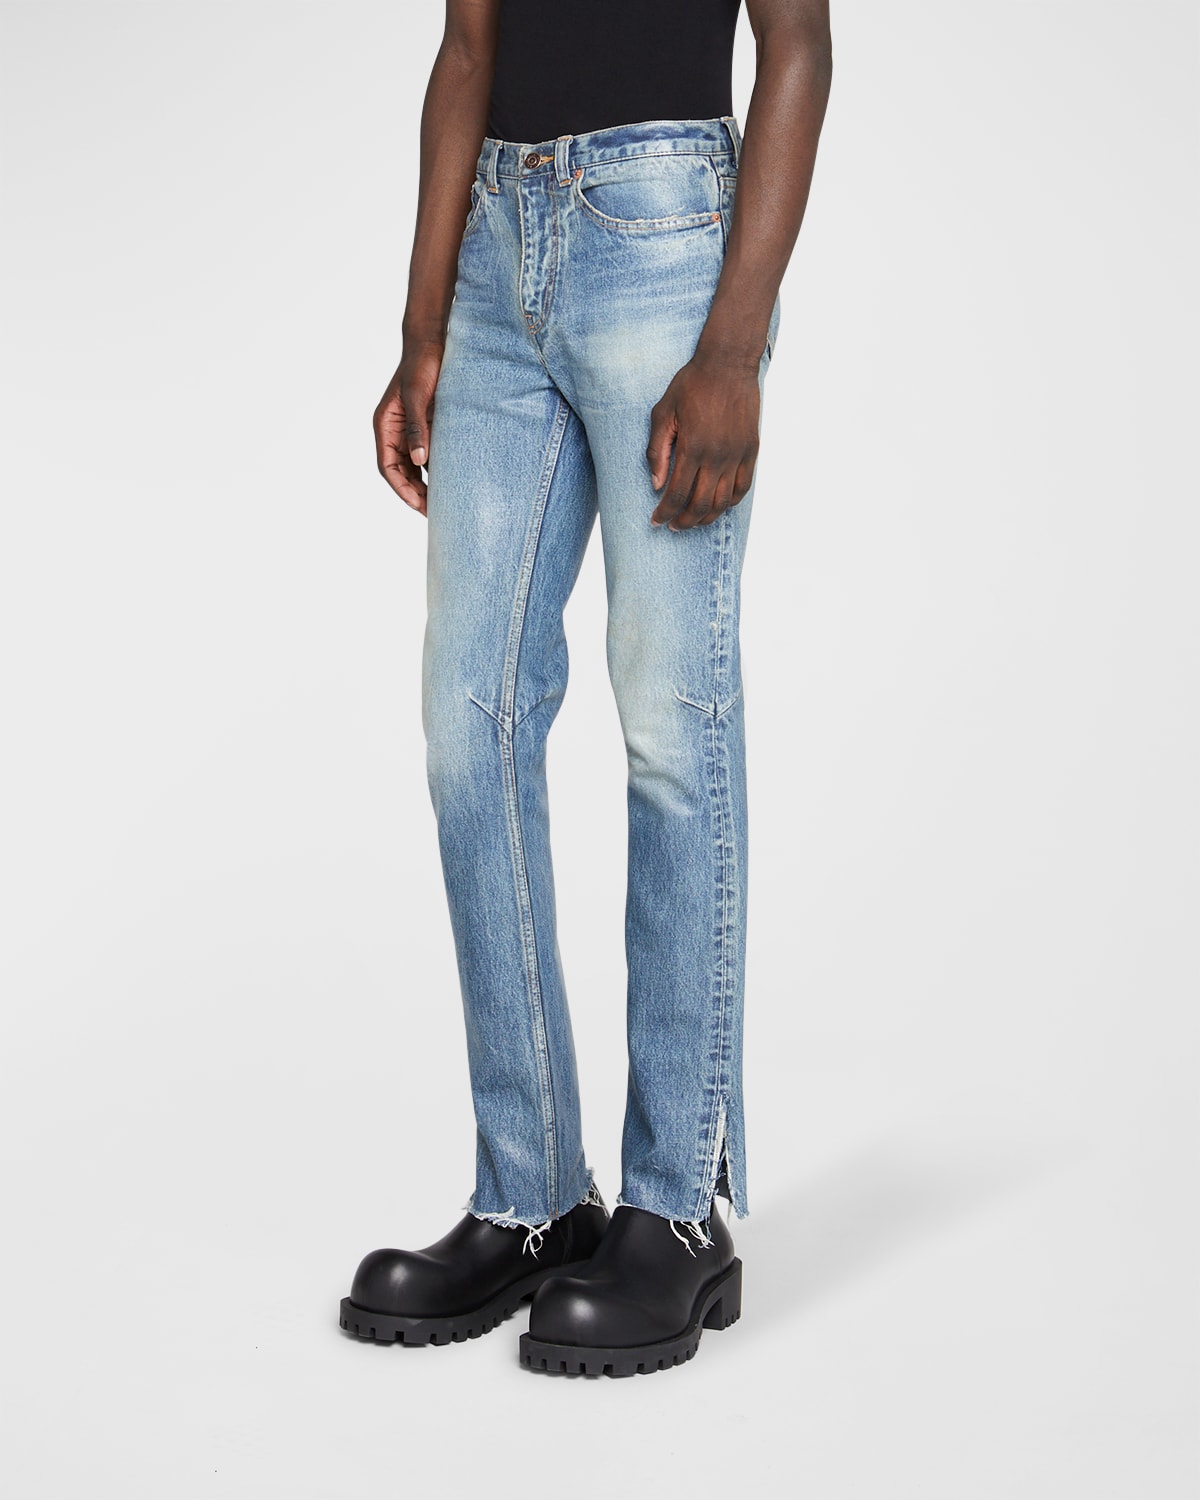 Balenciaga Men's Super Fitted Waxed Jeans